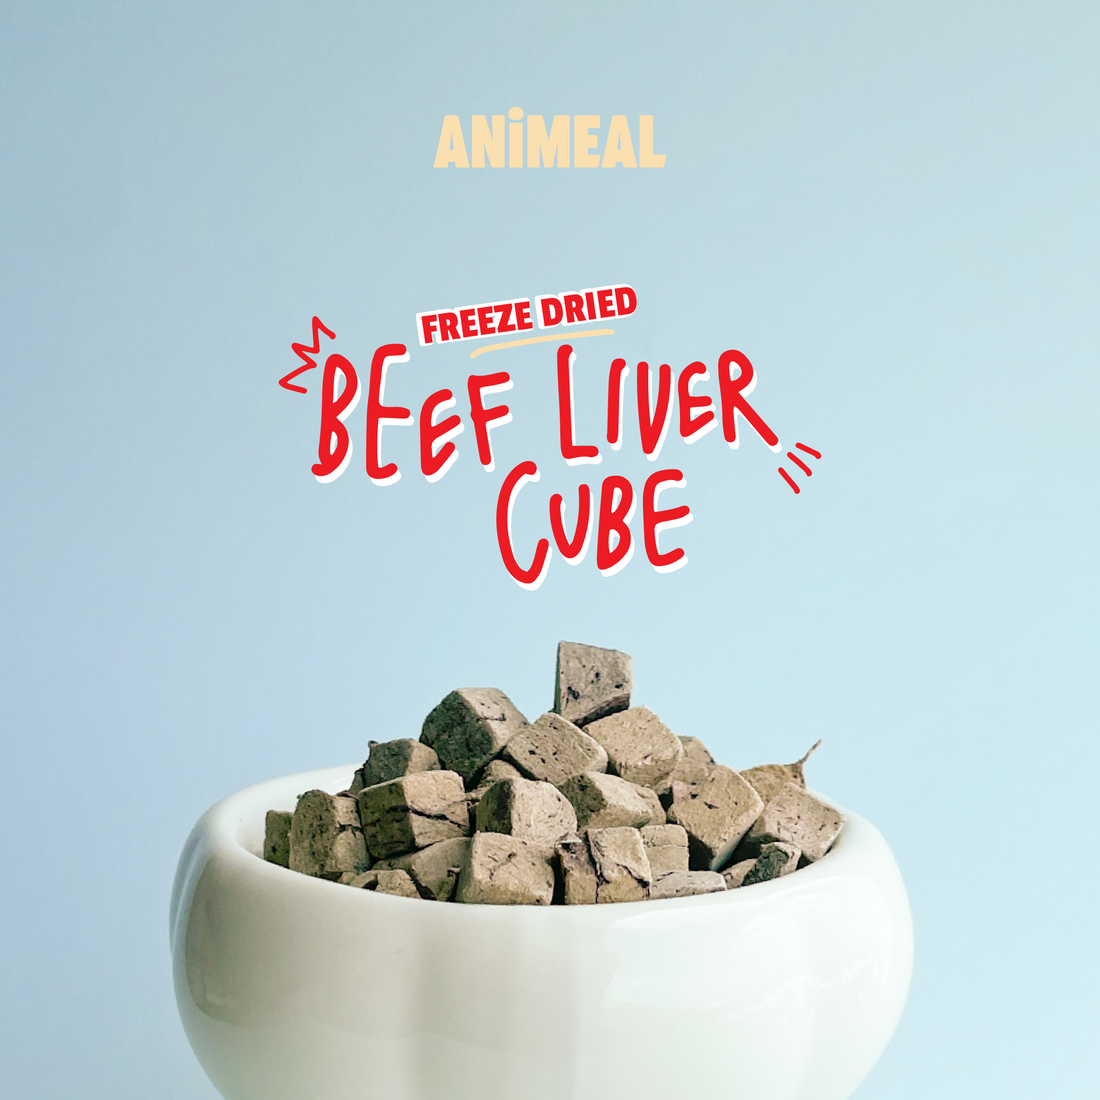 Freeze Dried Beef Liver Cube